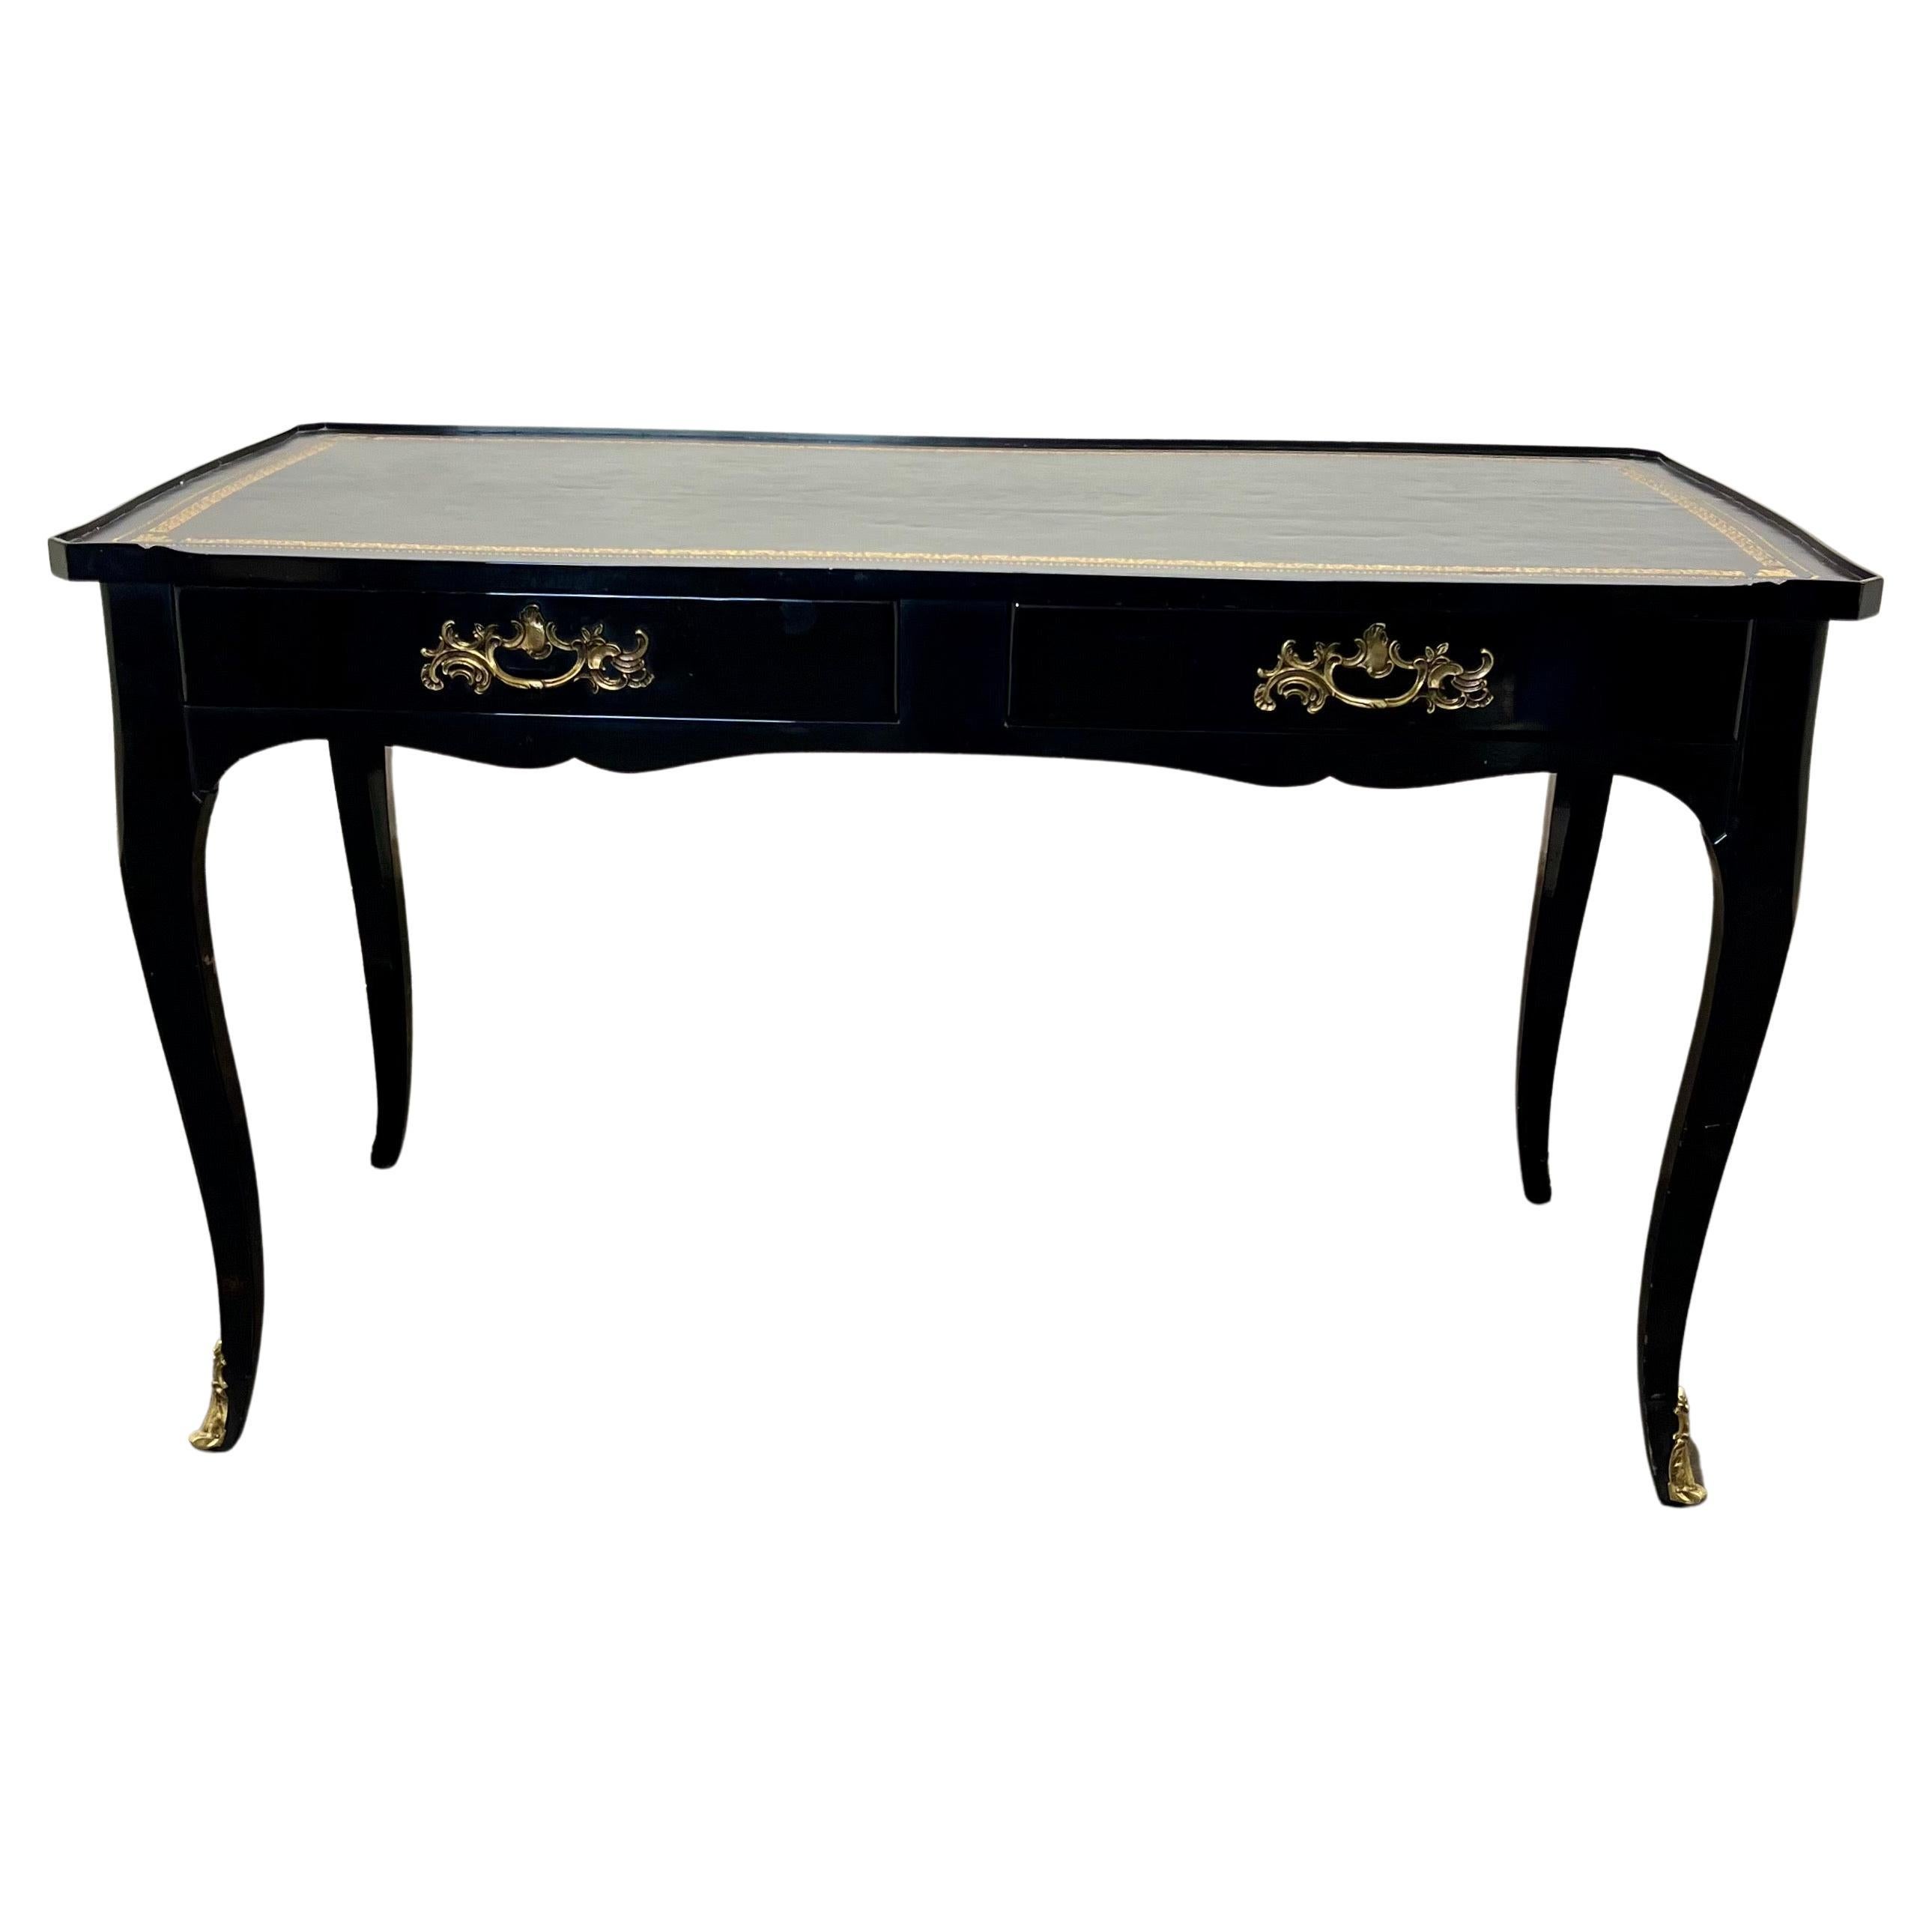 French Louis XV Black Lacquered Desk with Black Leather Top by Bodart